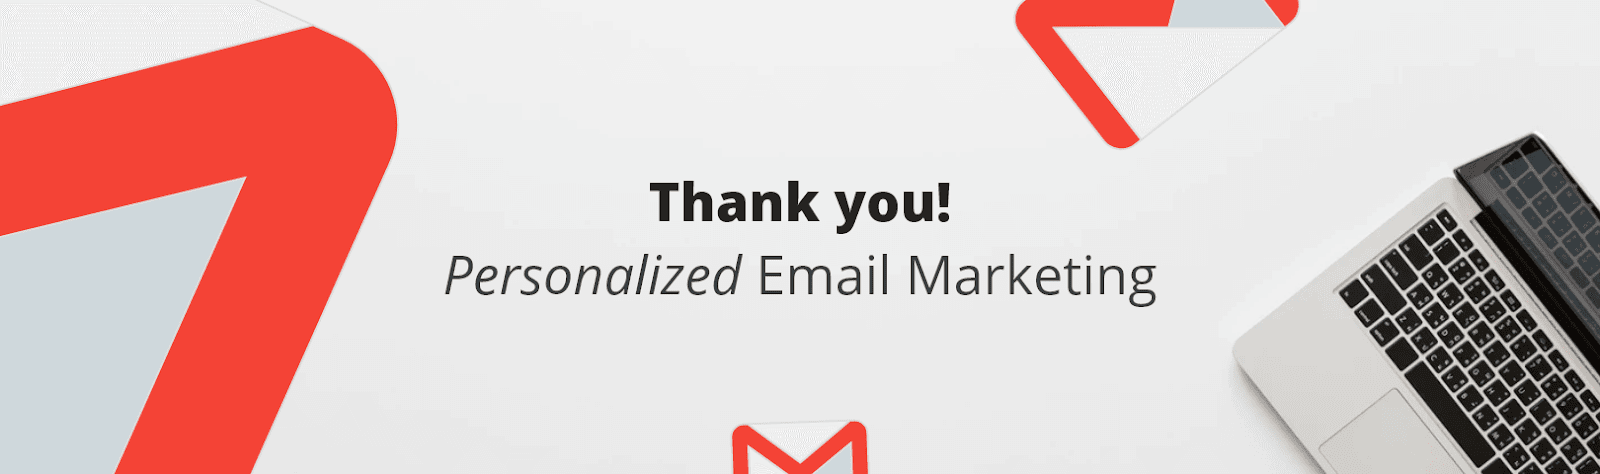 personalized-email-marketing